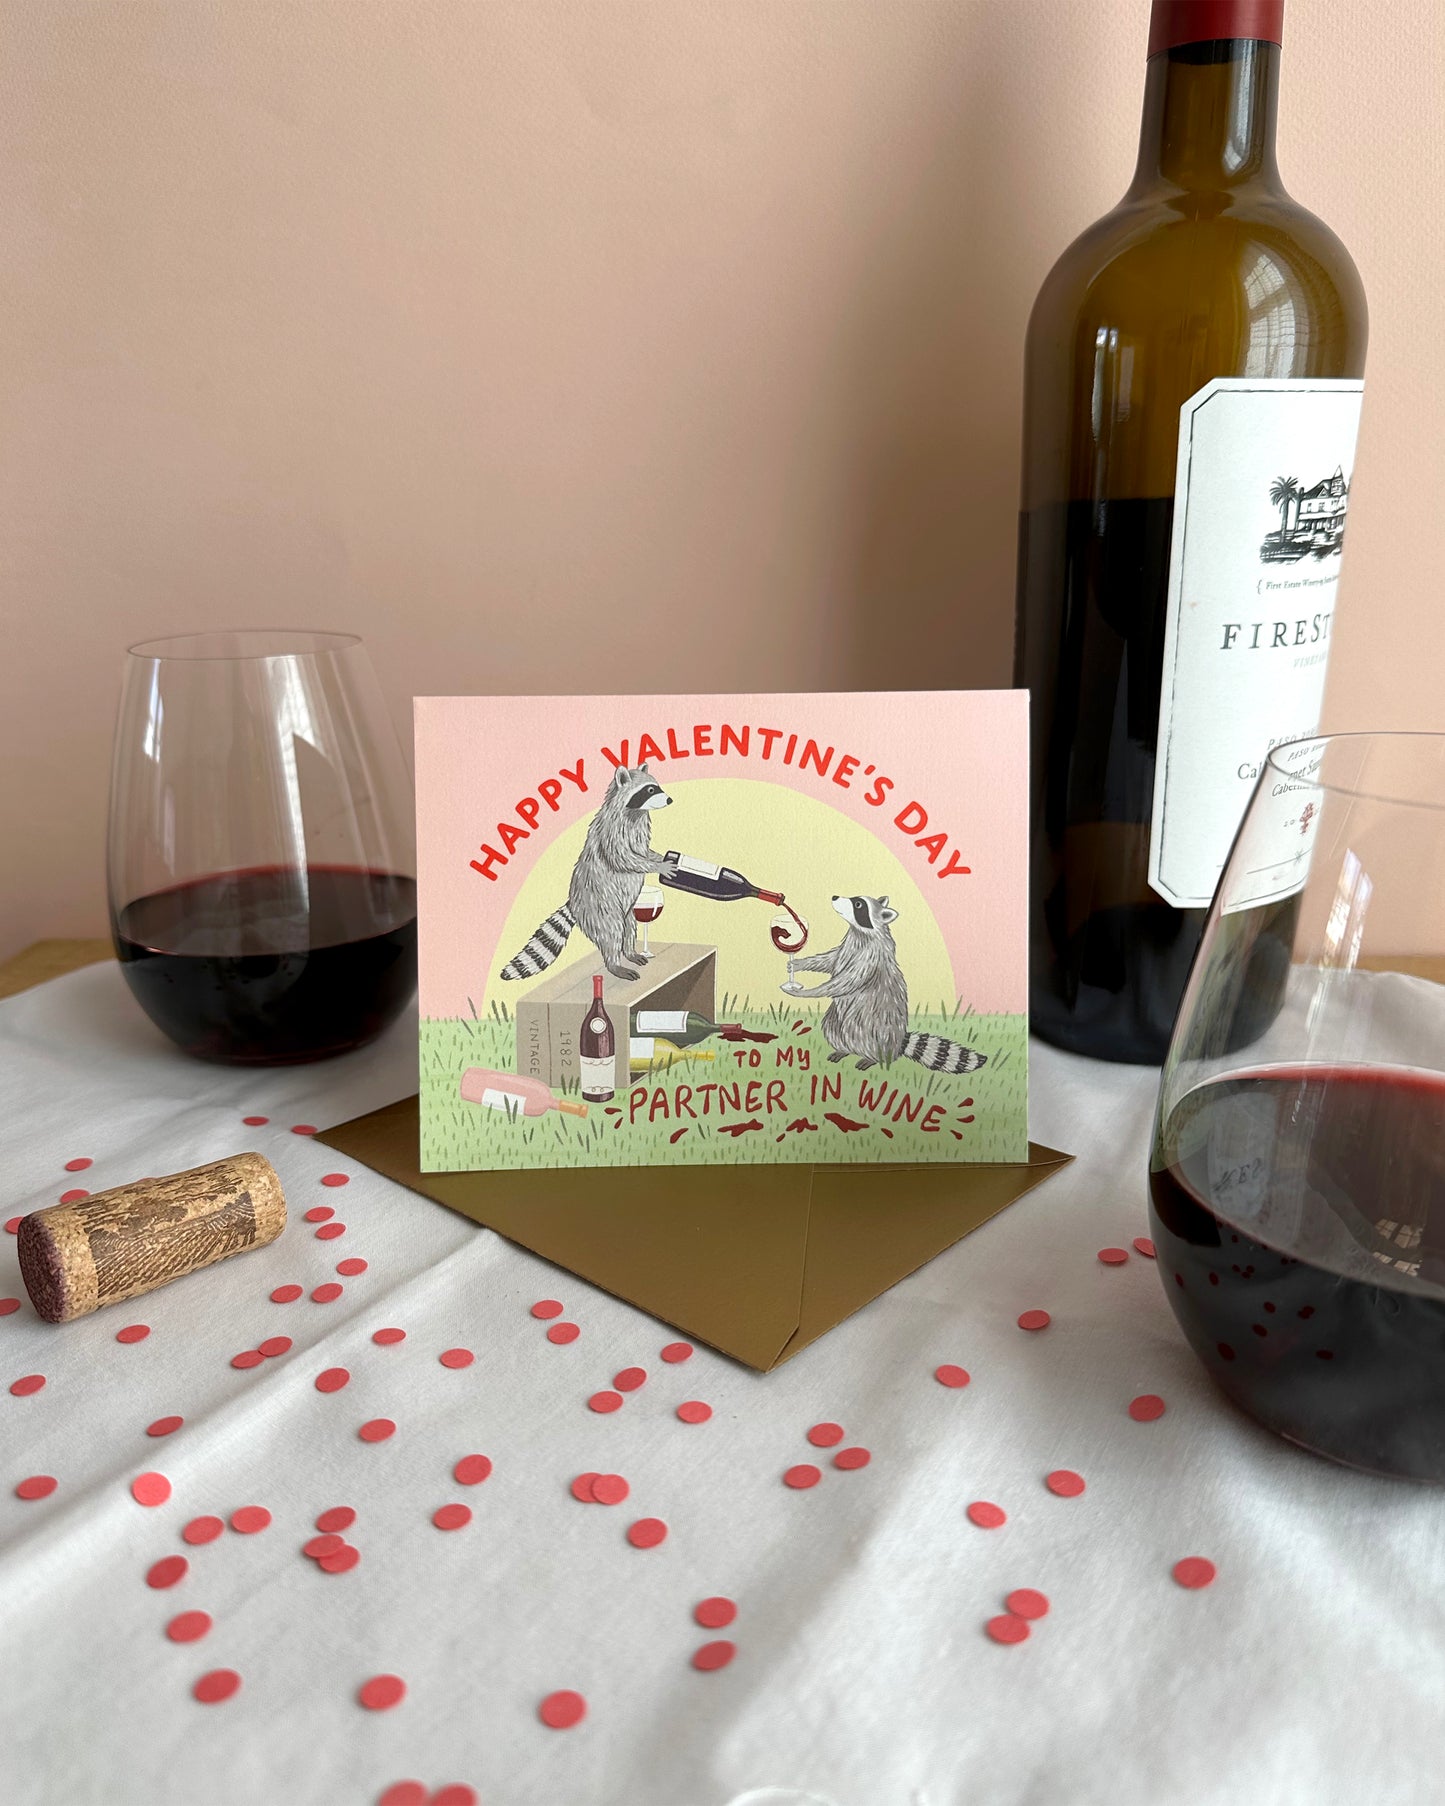 RACCOON PARTNER IN WINE - VALENTINE'S DAY GREETING CARD